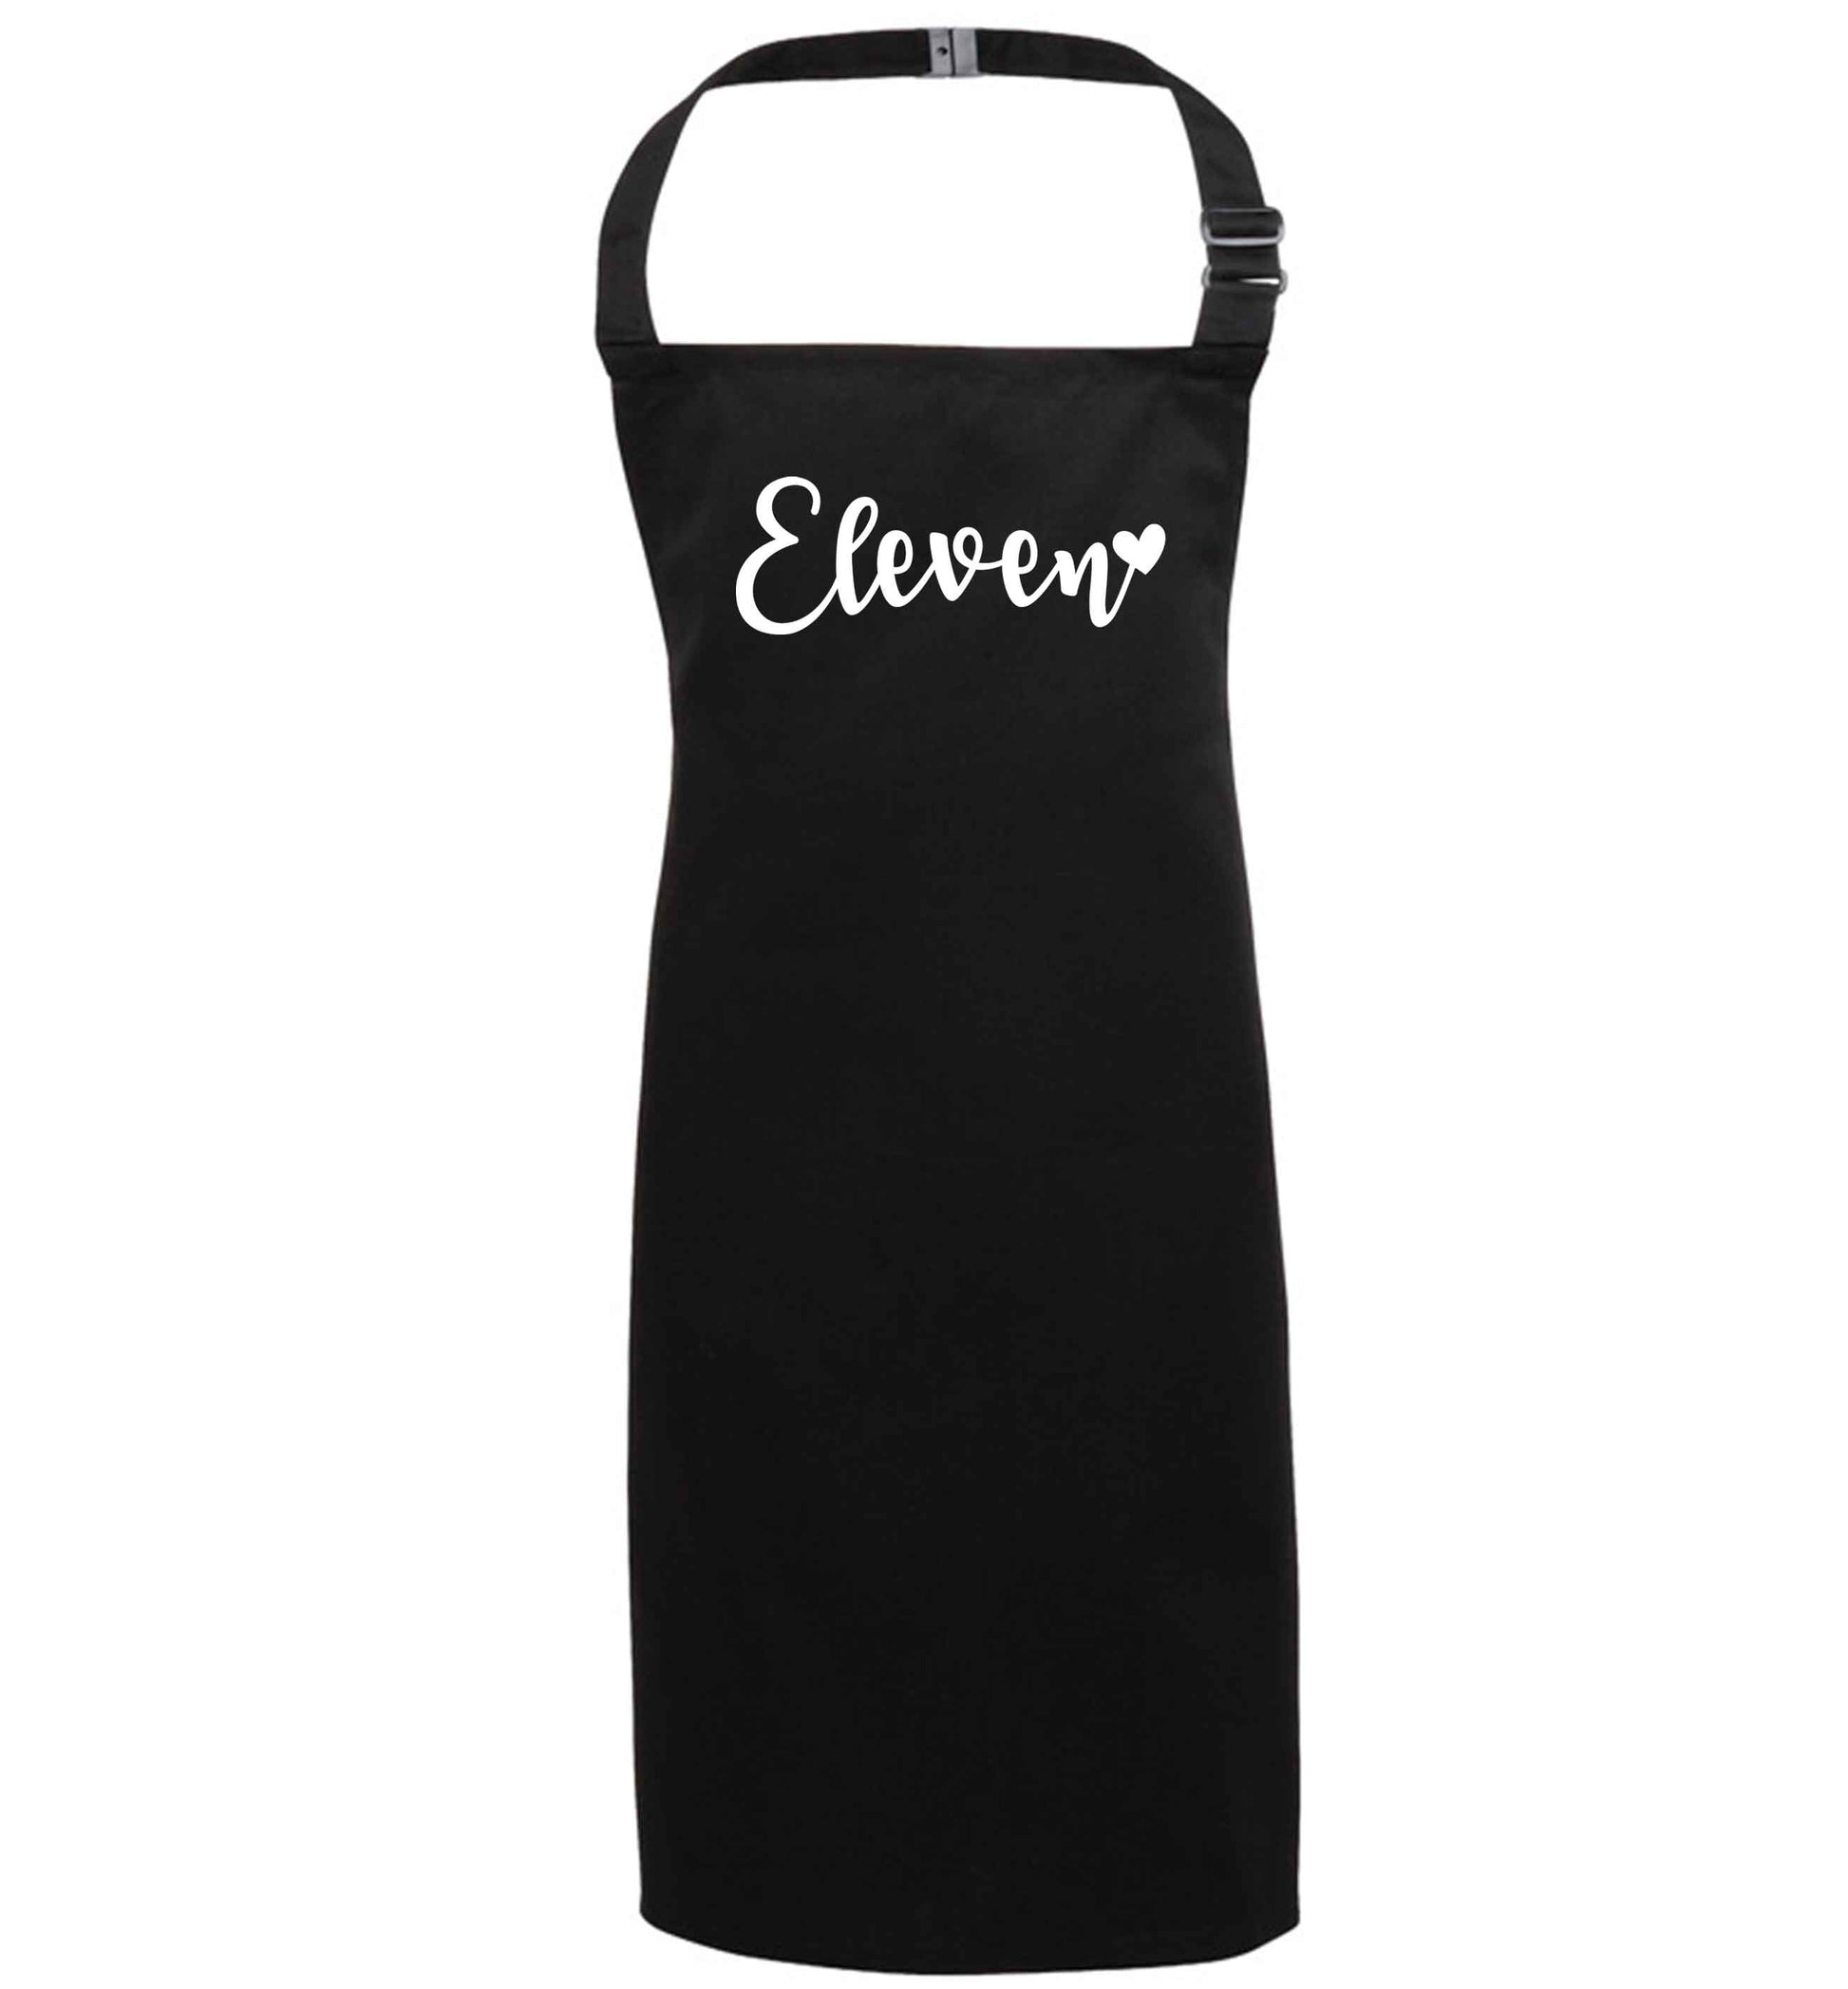 Eleven and heart! black apron 7-10 years